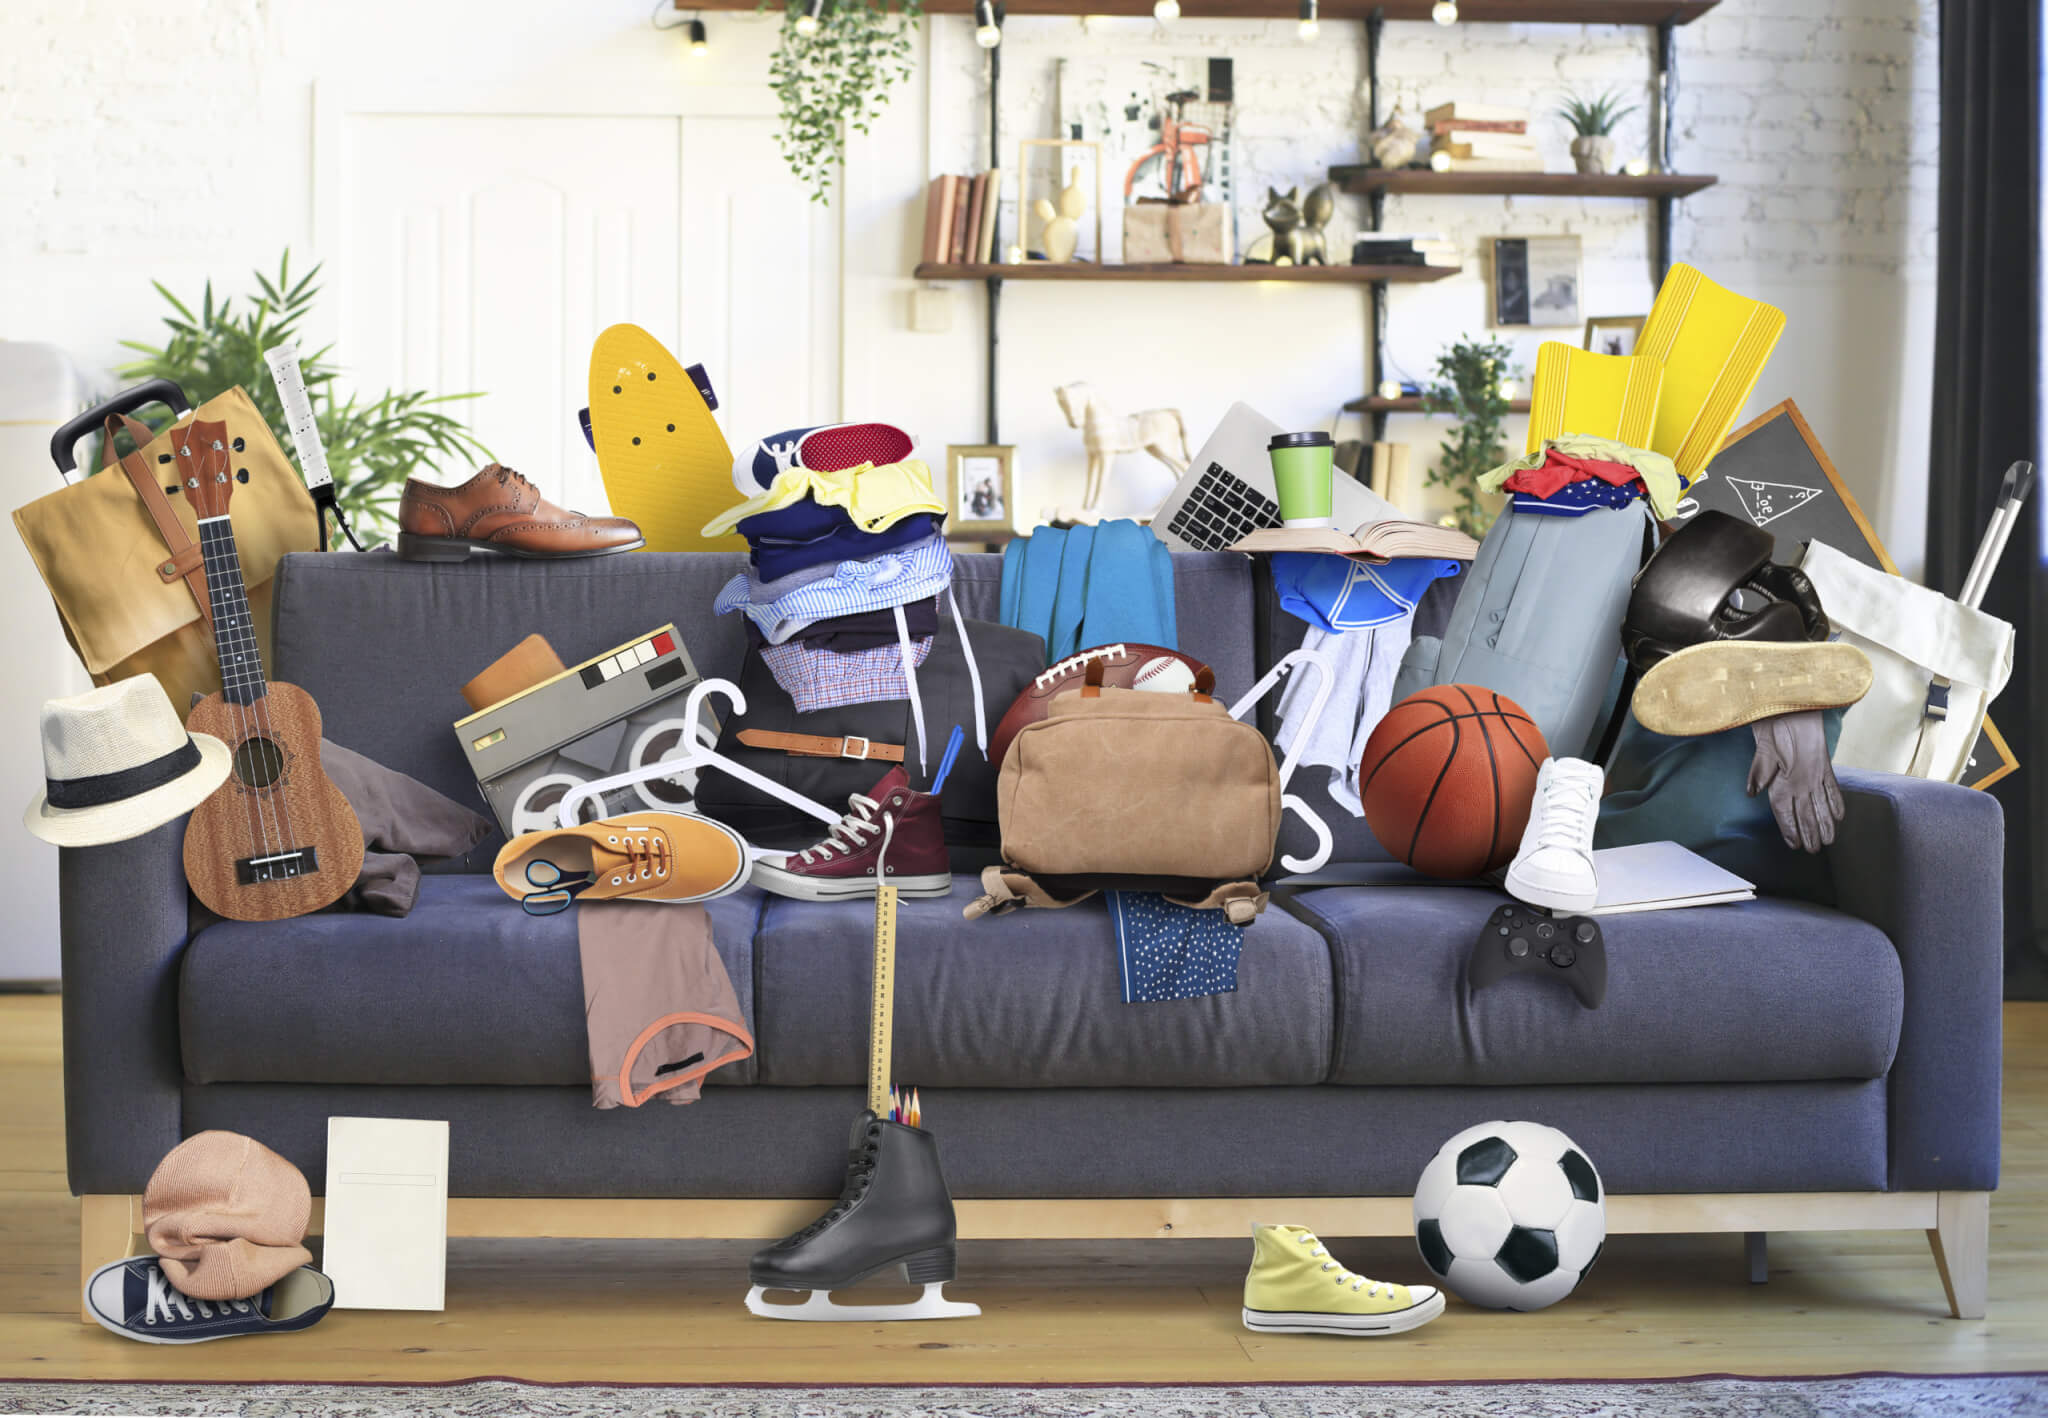 Messy house: Couch filled with junk